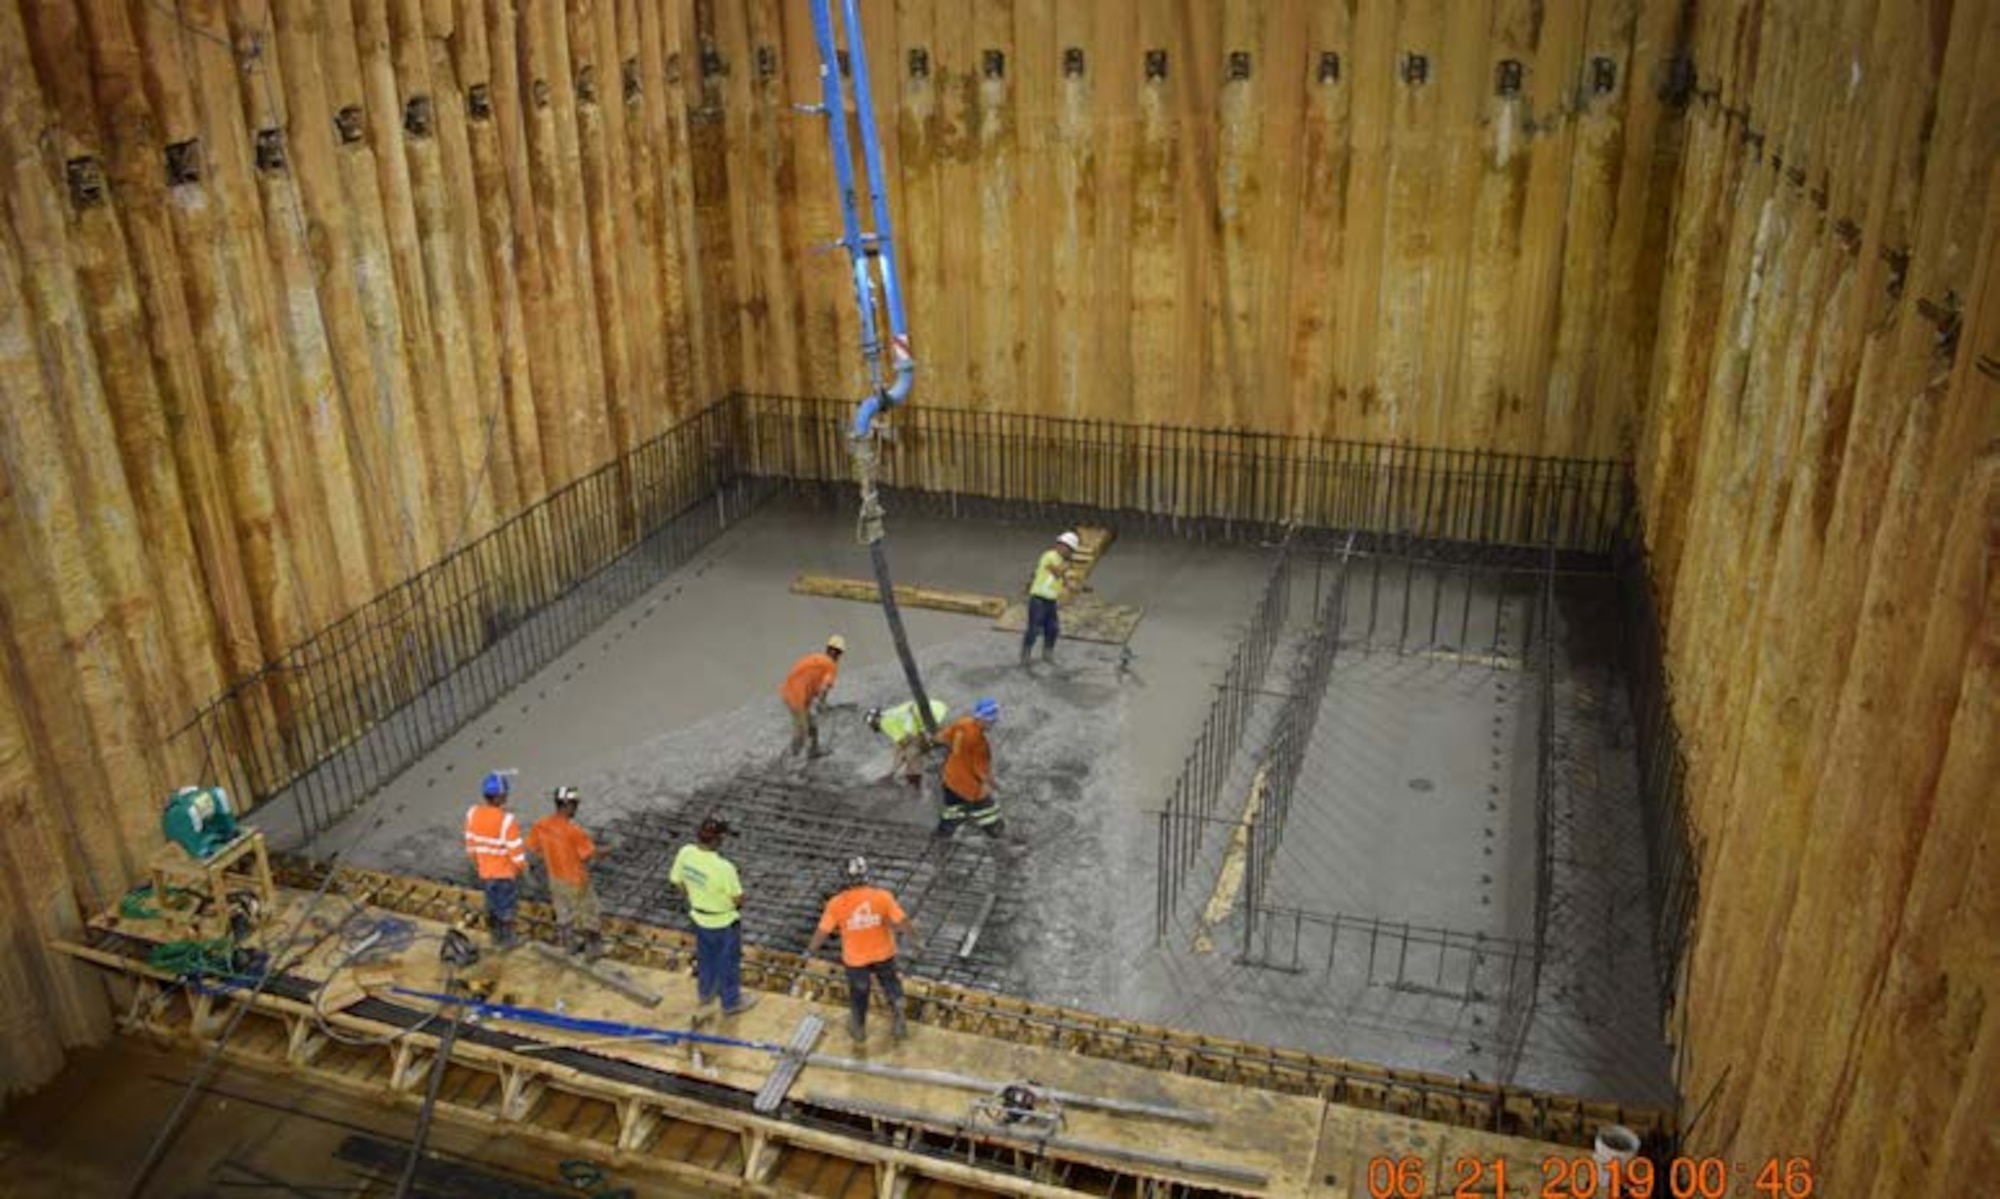 APTIM Federal Services and Morsey Constructor crews assist with a concrete pour June 21, 2019, in the Block 1 heater pit for the Hypersonic Test Capability Improvement (HTCI) Project at Arnold Air Force Base, Tenn. A team of Arnold Engineering Development Complex engineers is heading up the project. The goal of the project is to transform the J-5 facility to support future hypersonic weapon acquisition and research and development programs. The pit will house the heaters that allow the facility to test at hypersonic conditions. (U.S. Air Force photo)